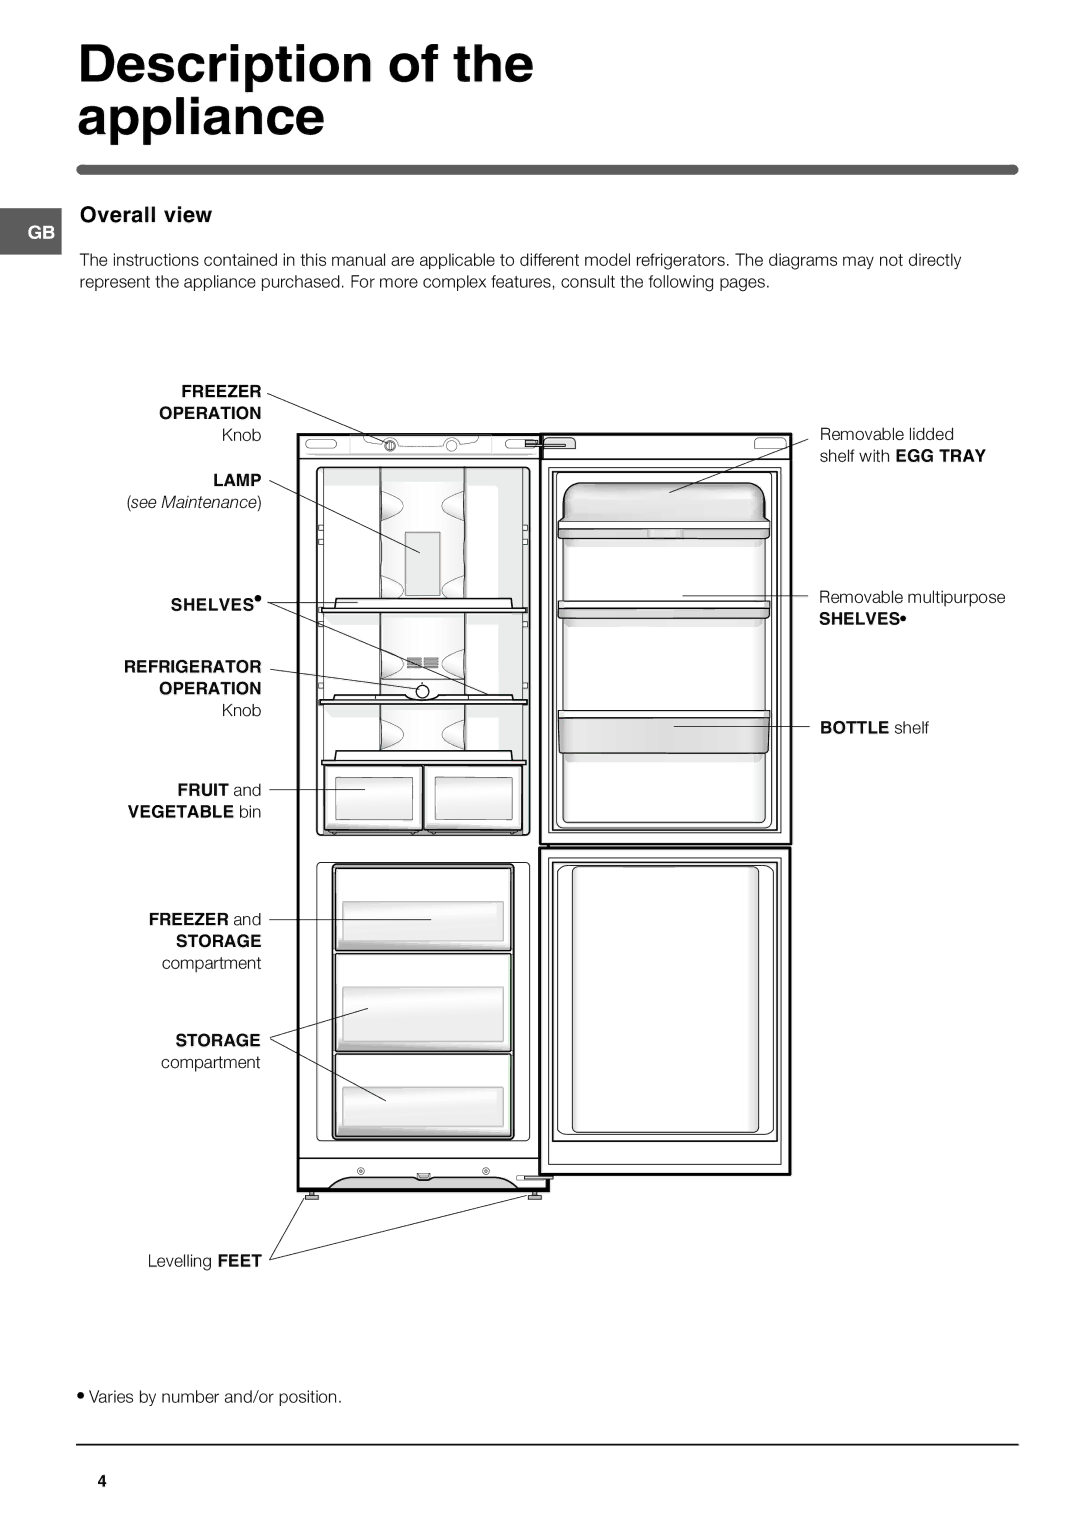 Hotpoint FF175B operating instructions Description of the appliance, Overall view 